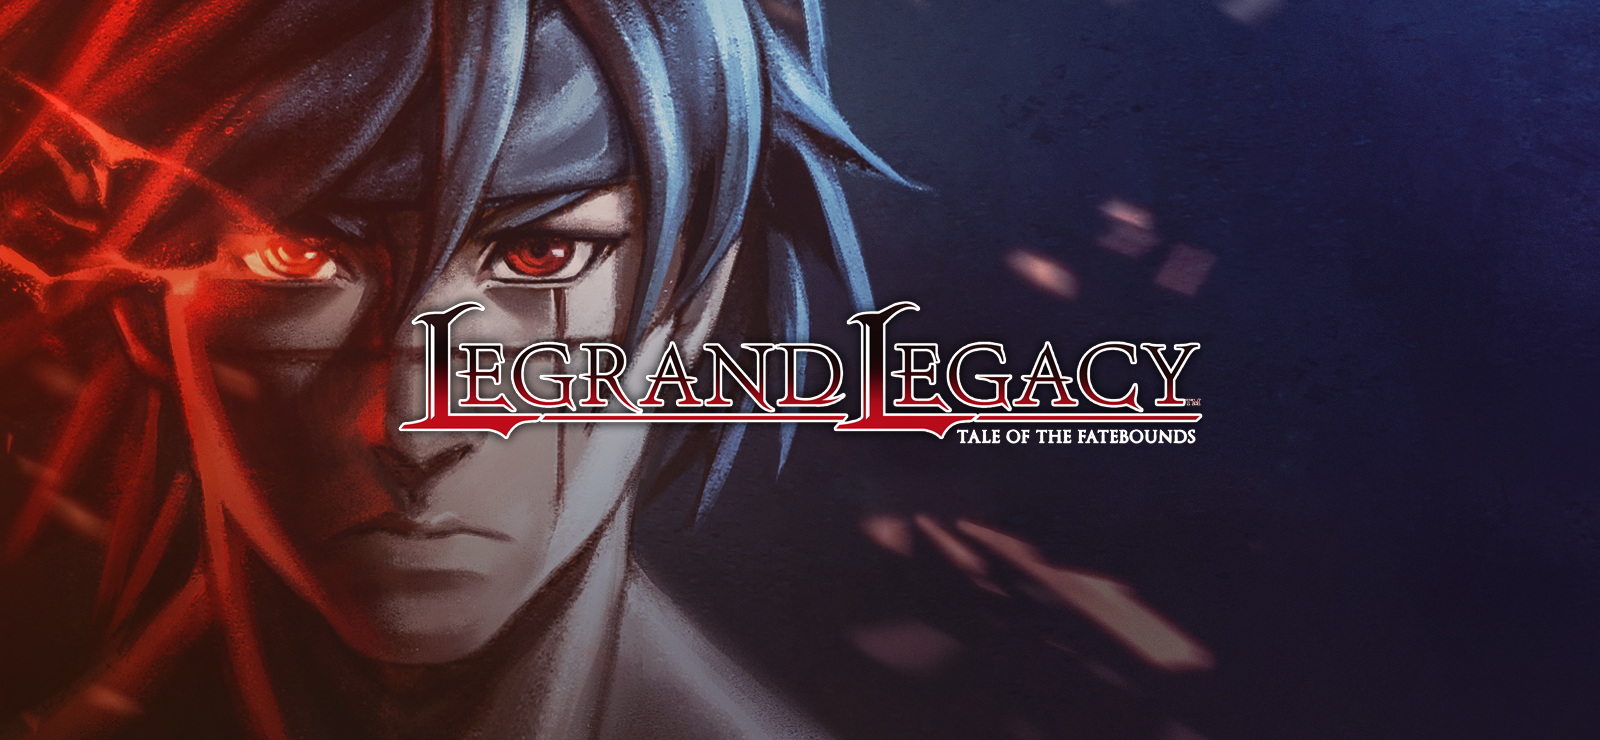 LEGRAND LEGACY: Tale Of The Fatebounds